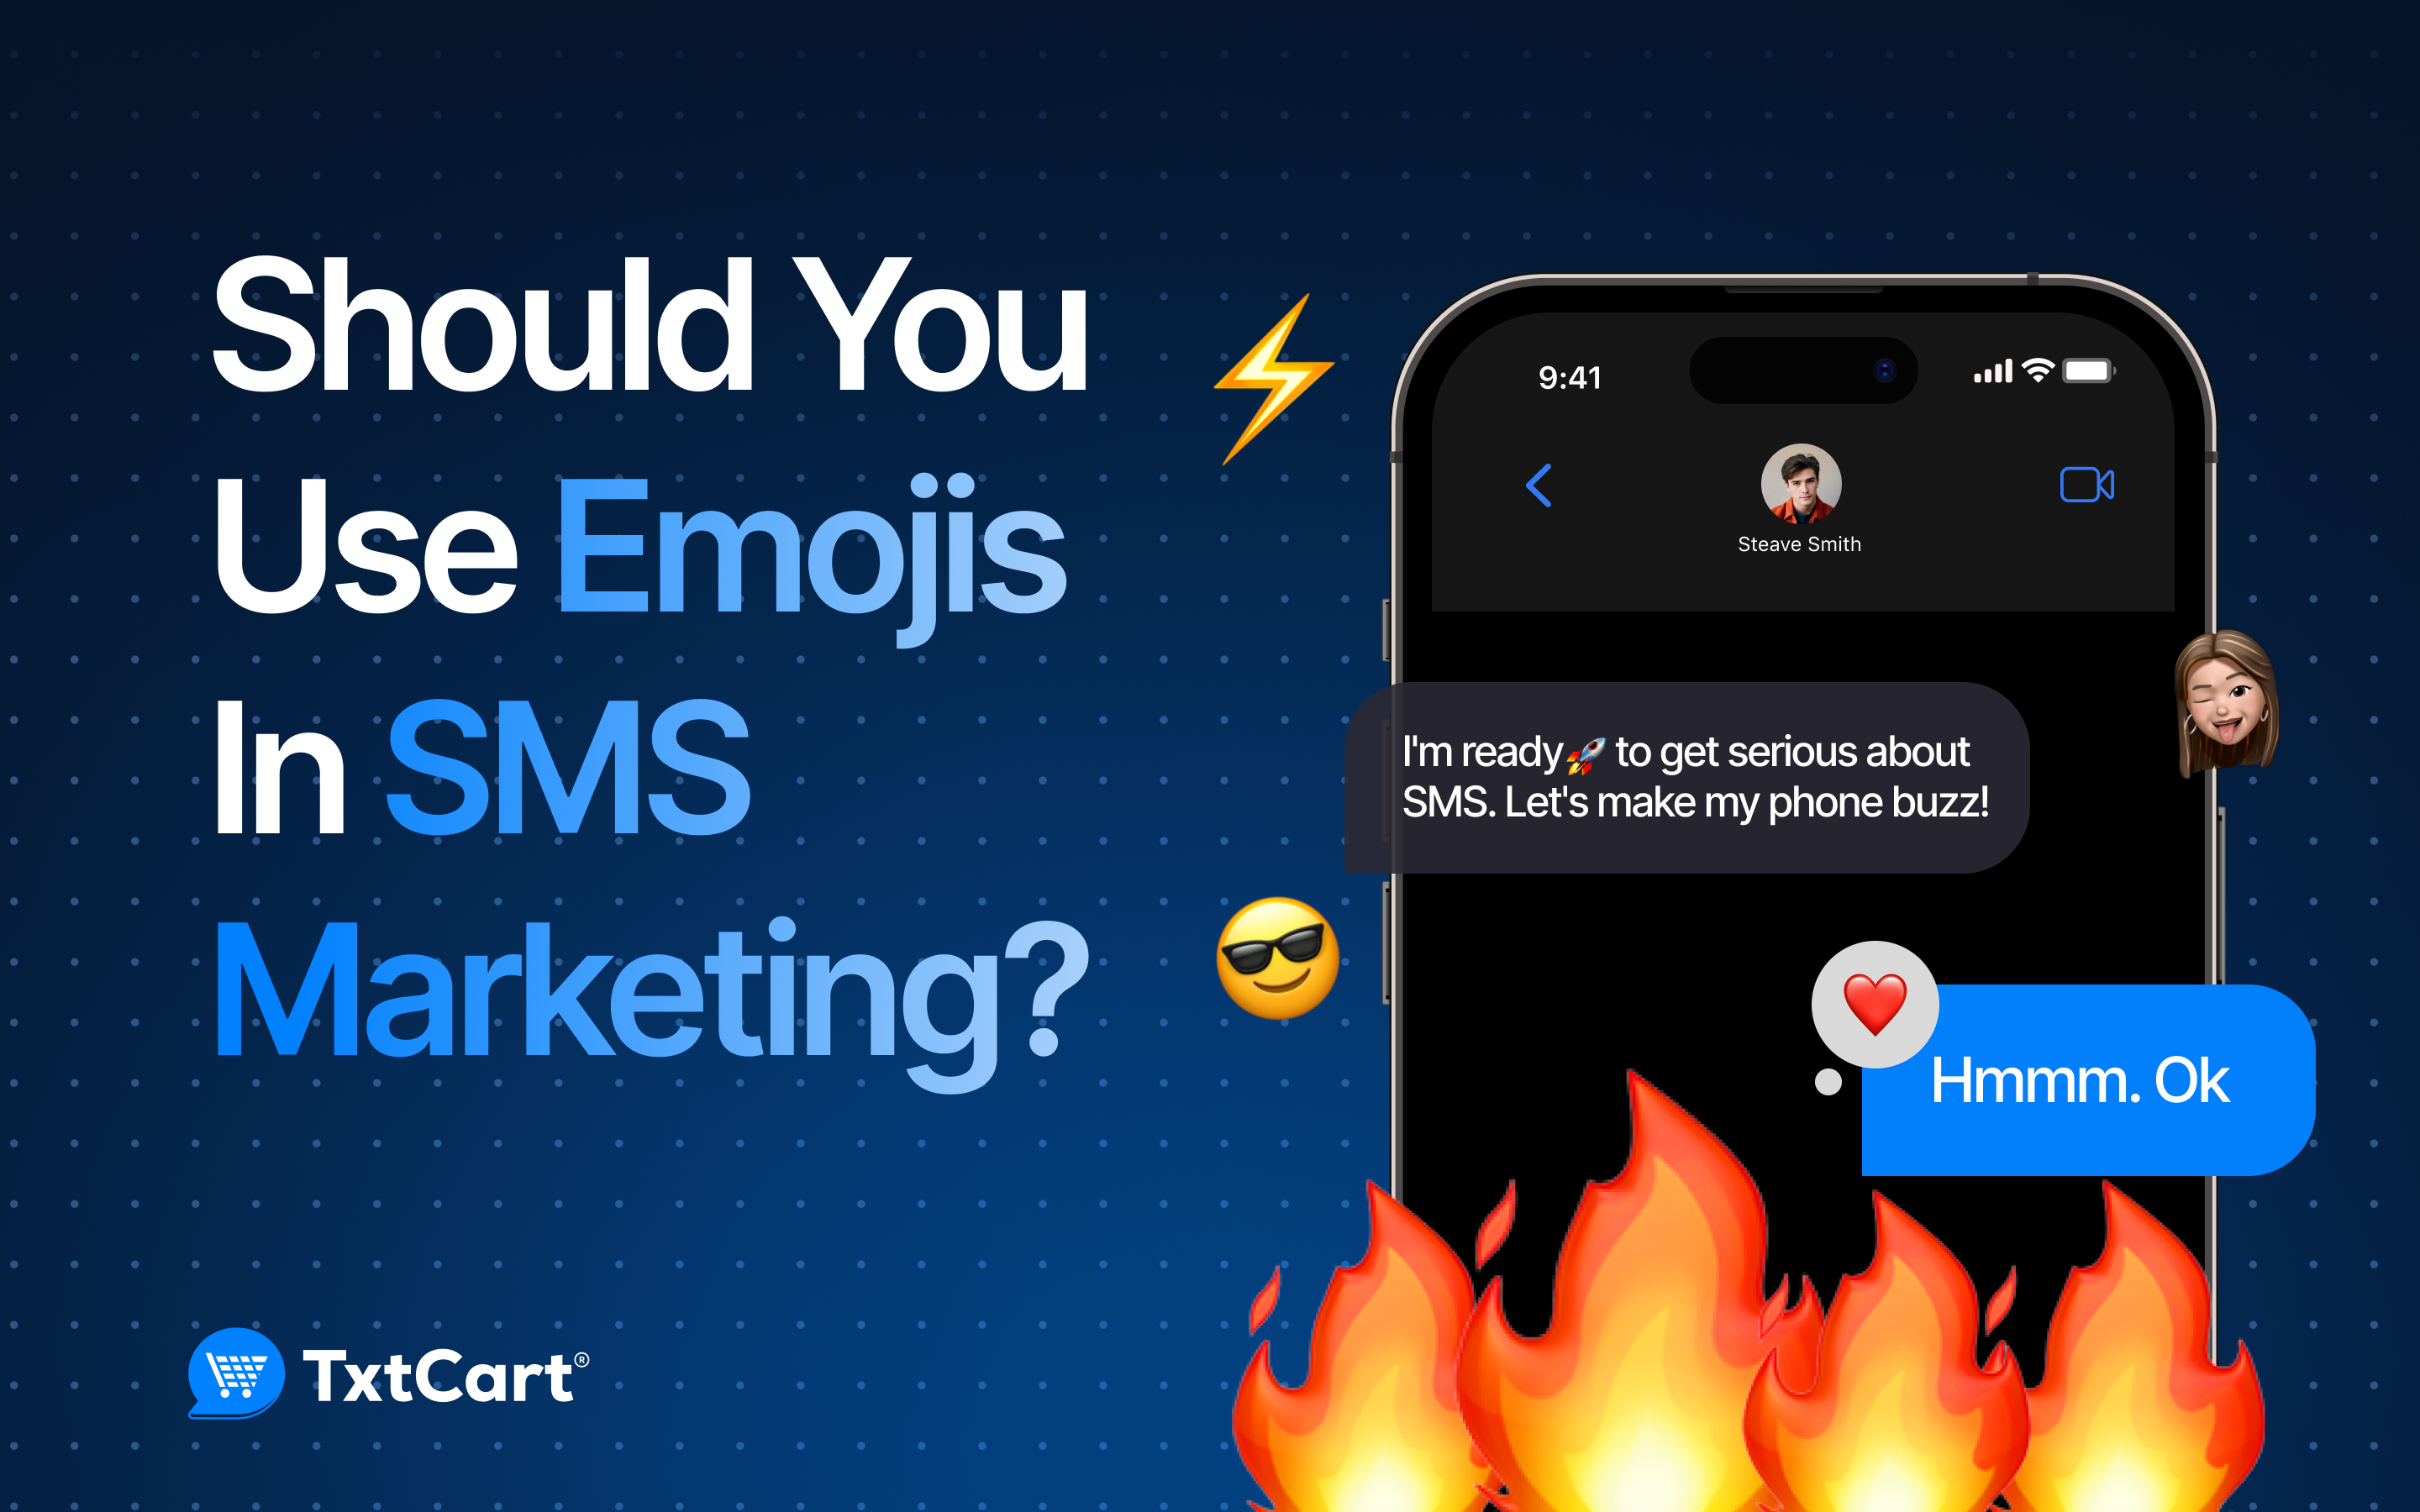 Should You Use Emojis In SMS Marketing